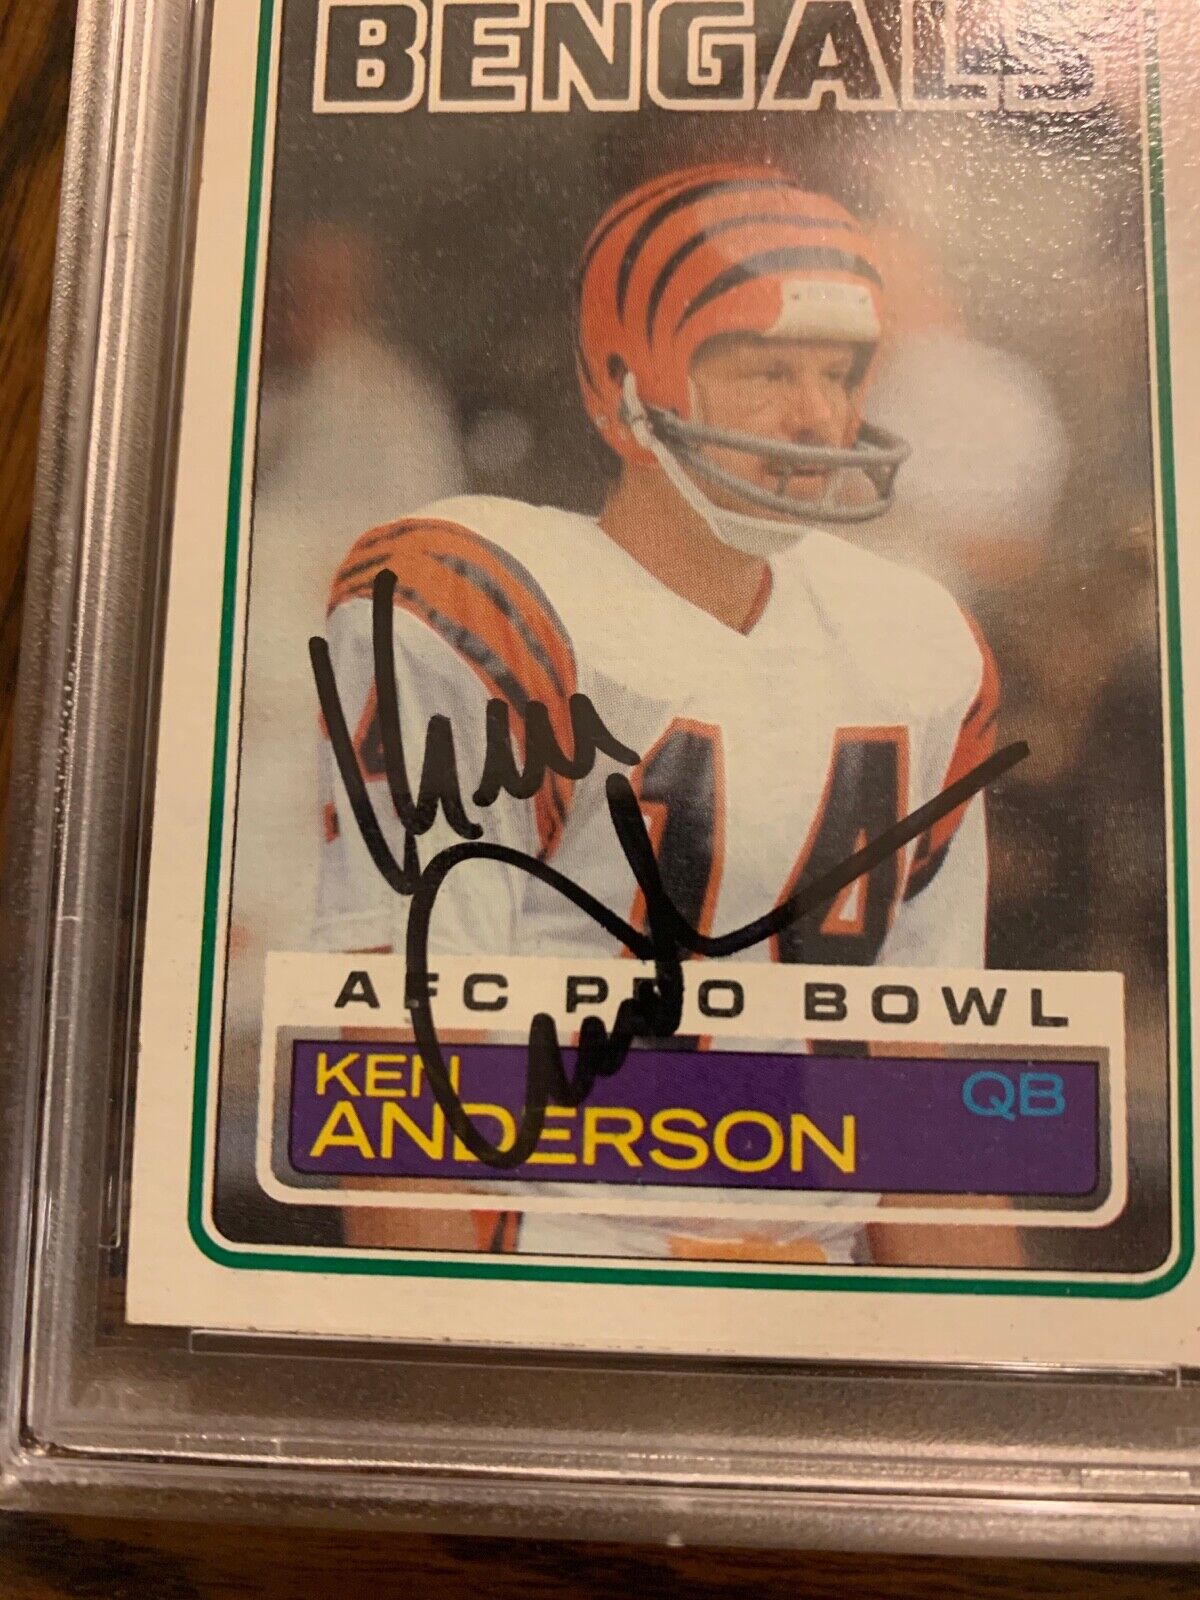 Ken Anderson Autographed 1983 Topps Football Card 232 PSA Slabbed & Certified